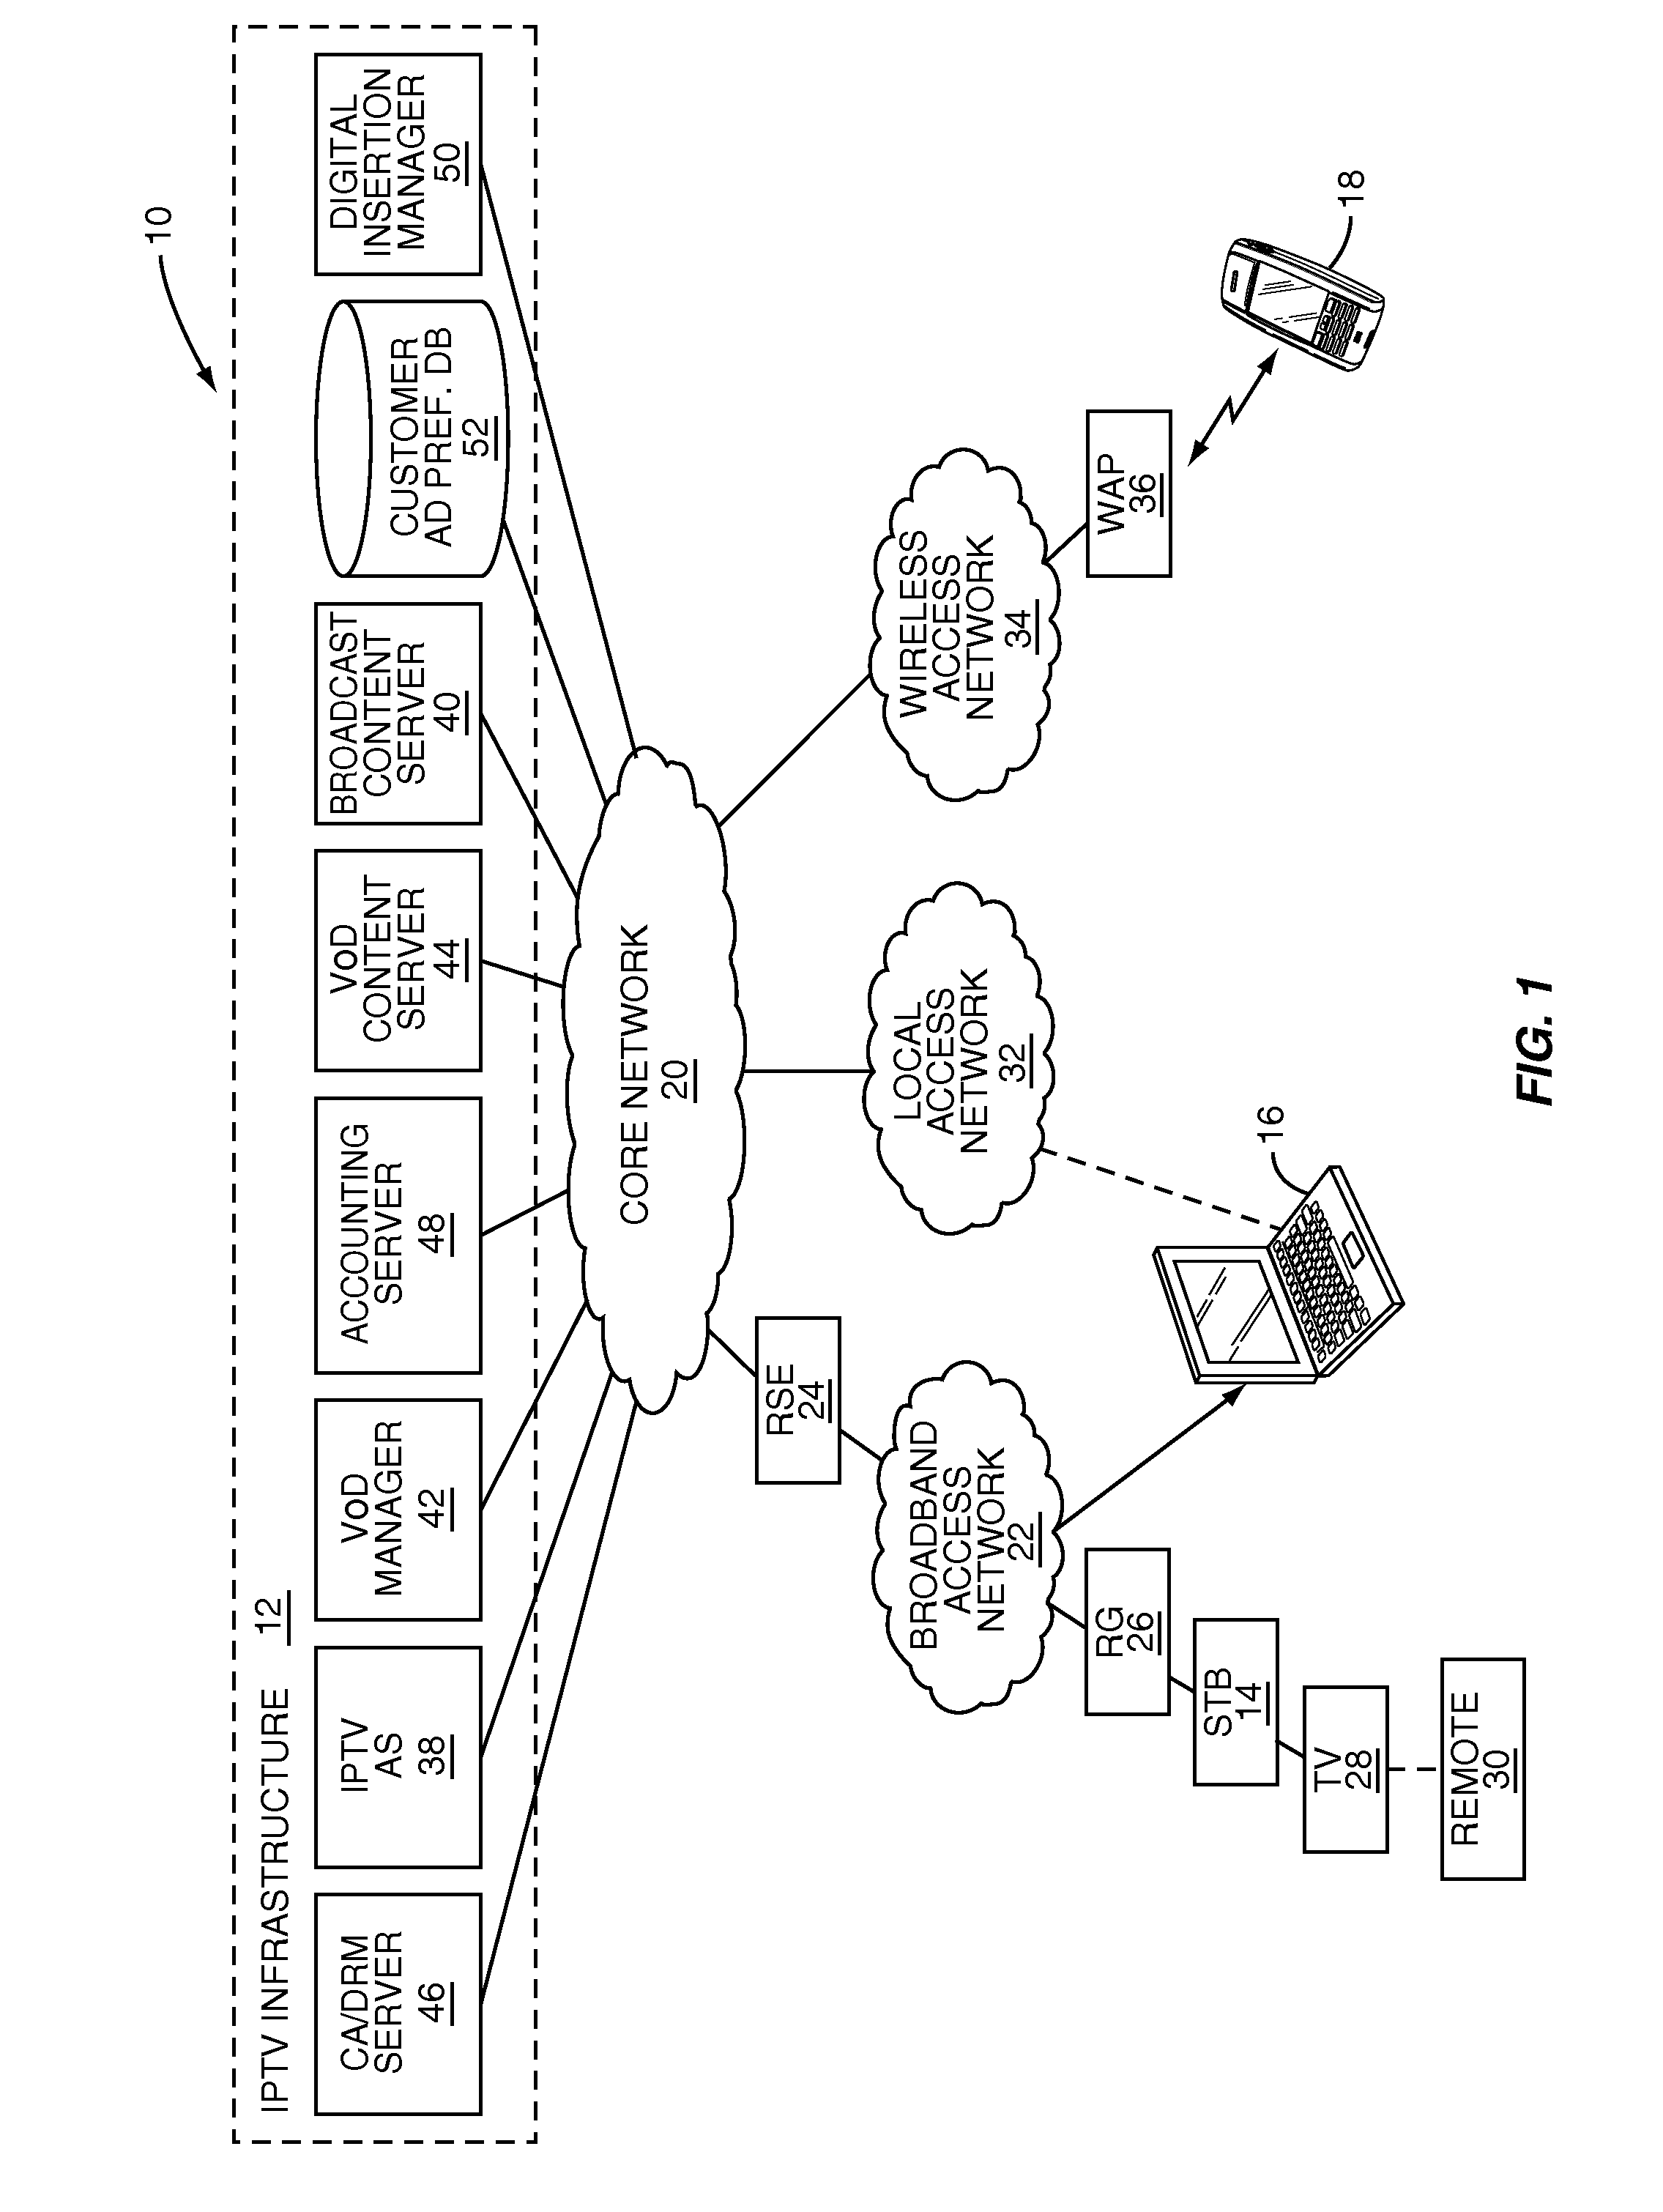 Method and system to control advertising